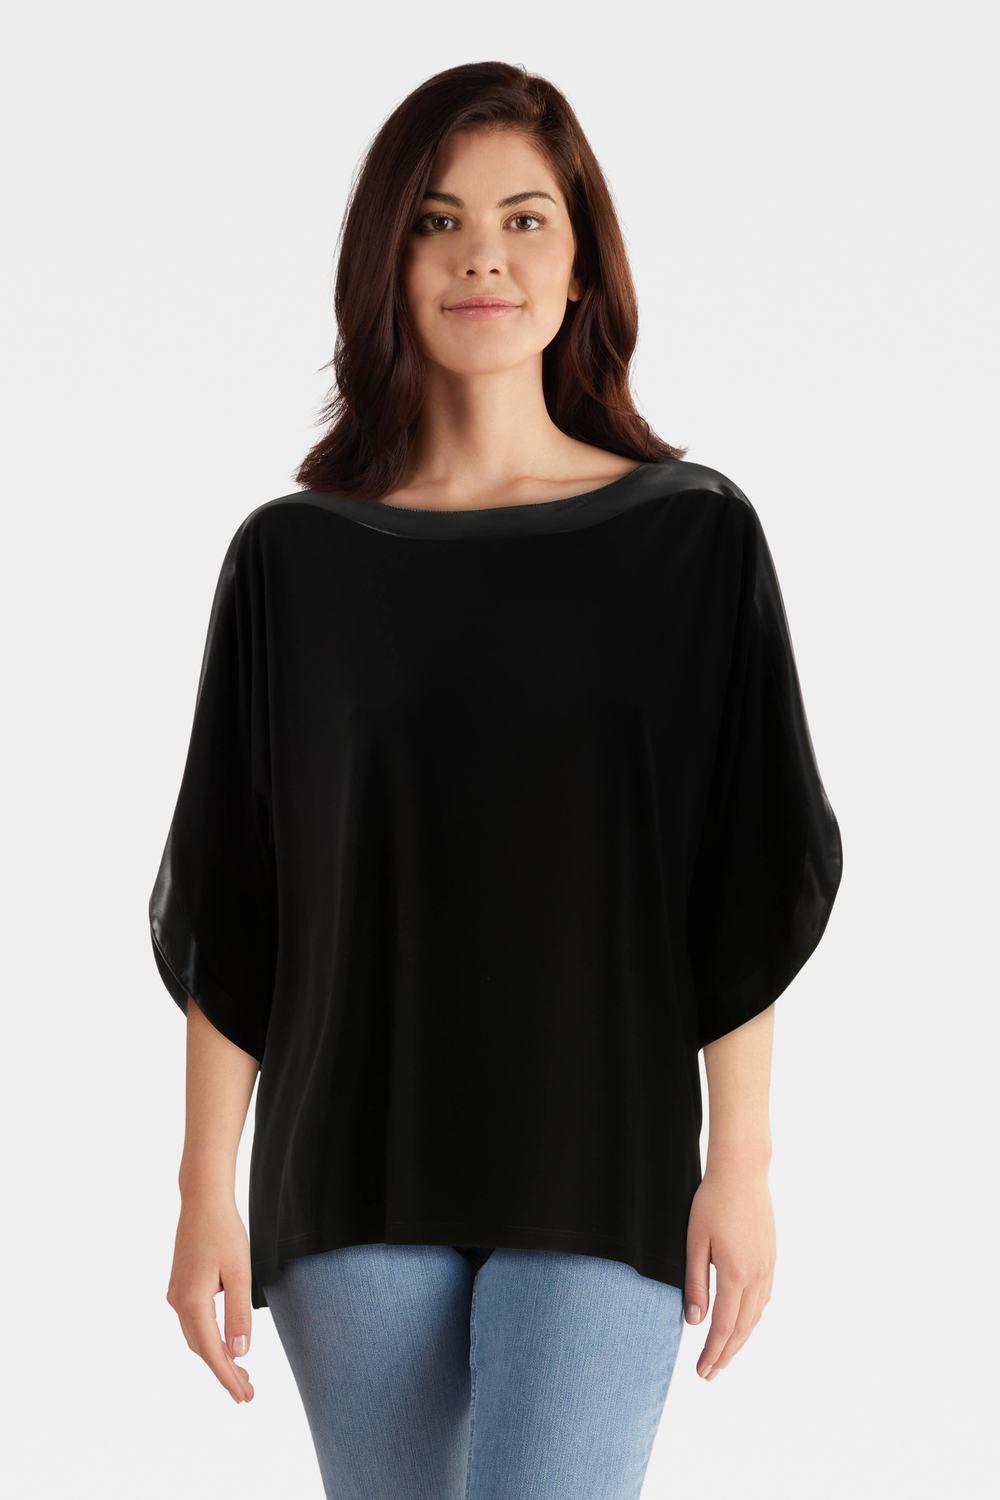 Faux Leather Flutter Sleeve Top Style 233129. Black/black